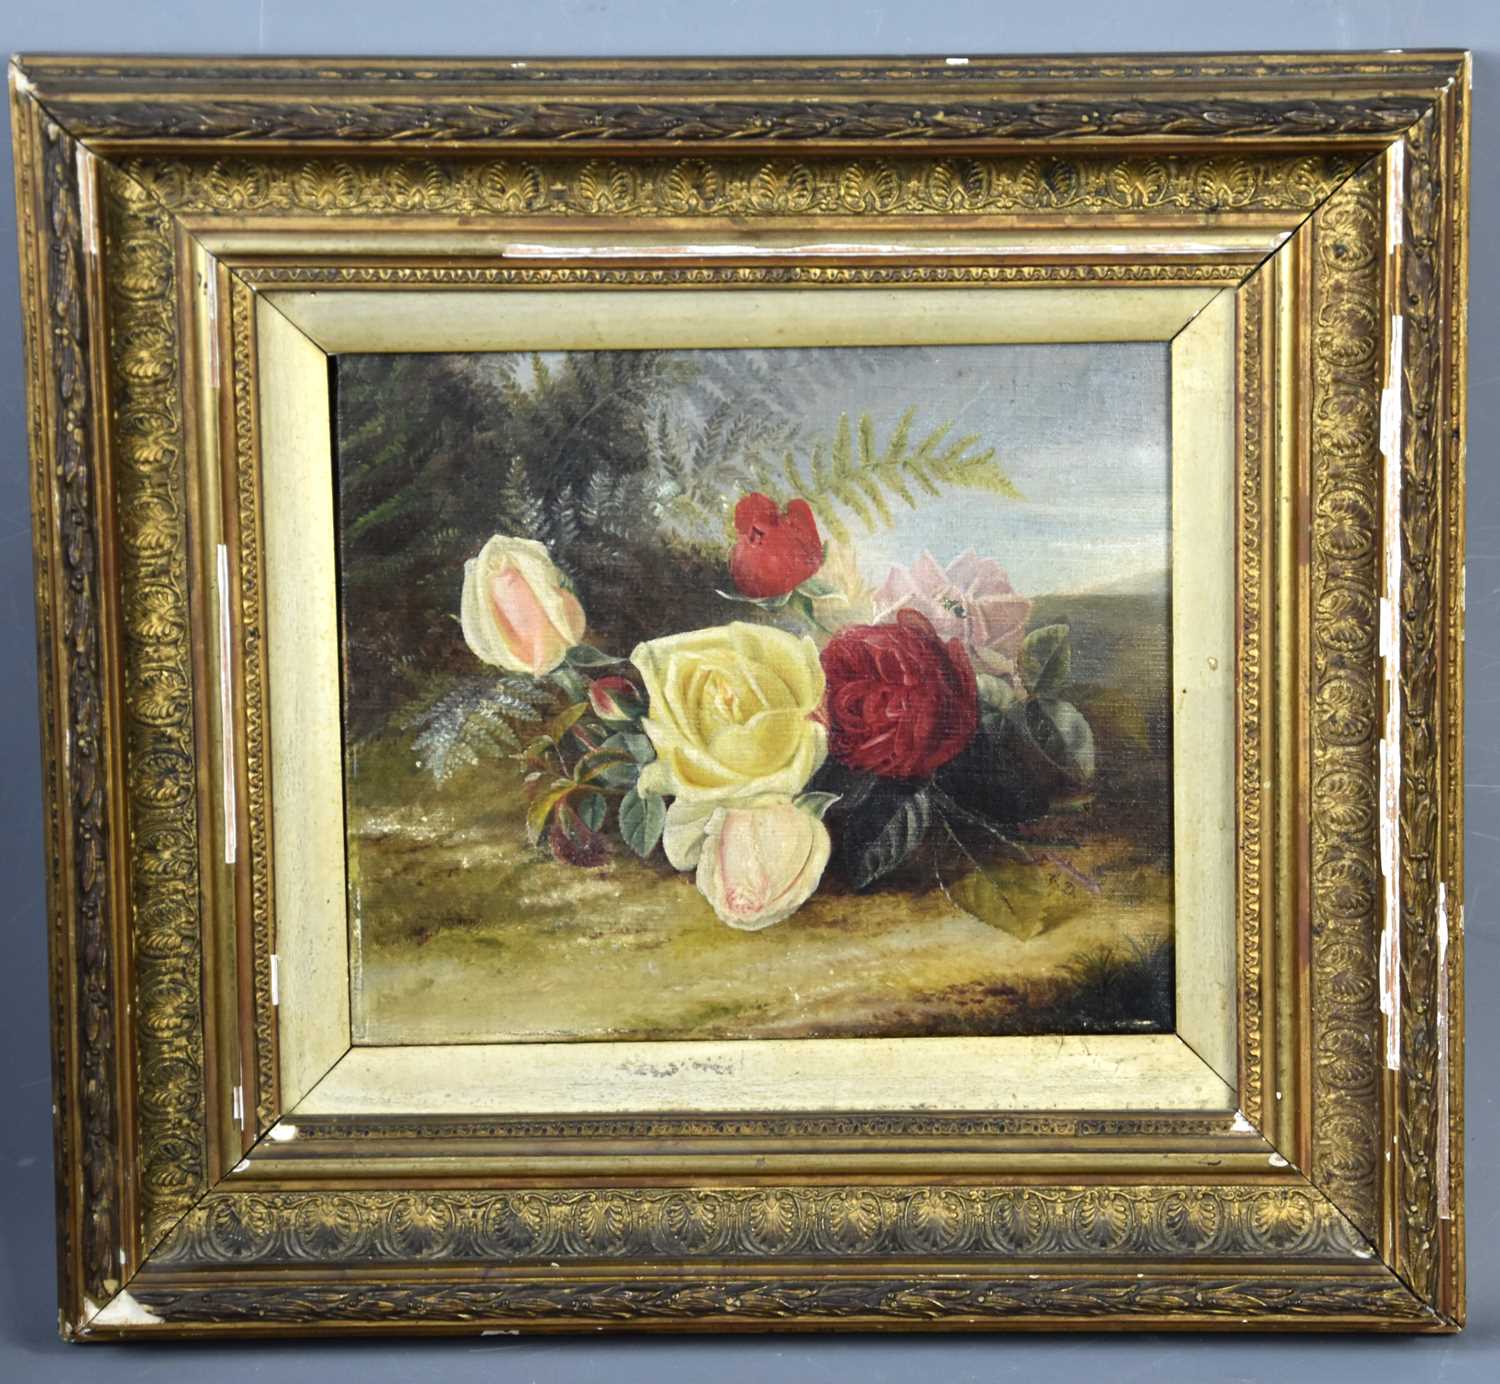 A 19th century still life of roses, oil on canvas, 21cm by 25cm.